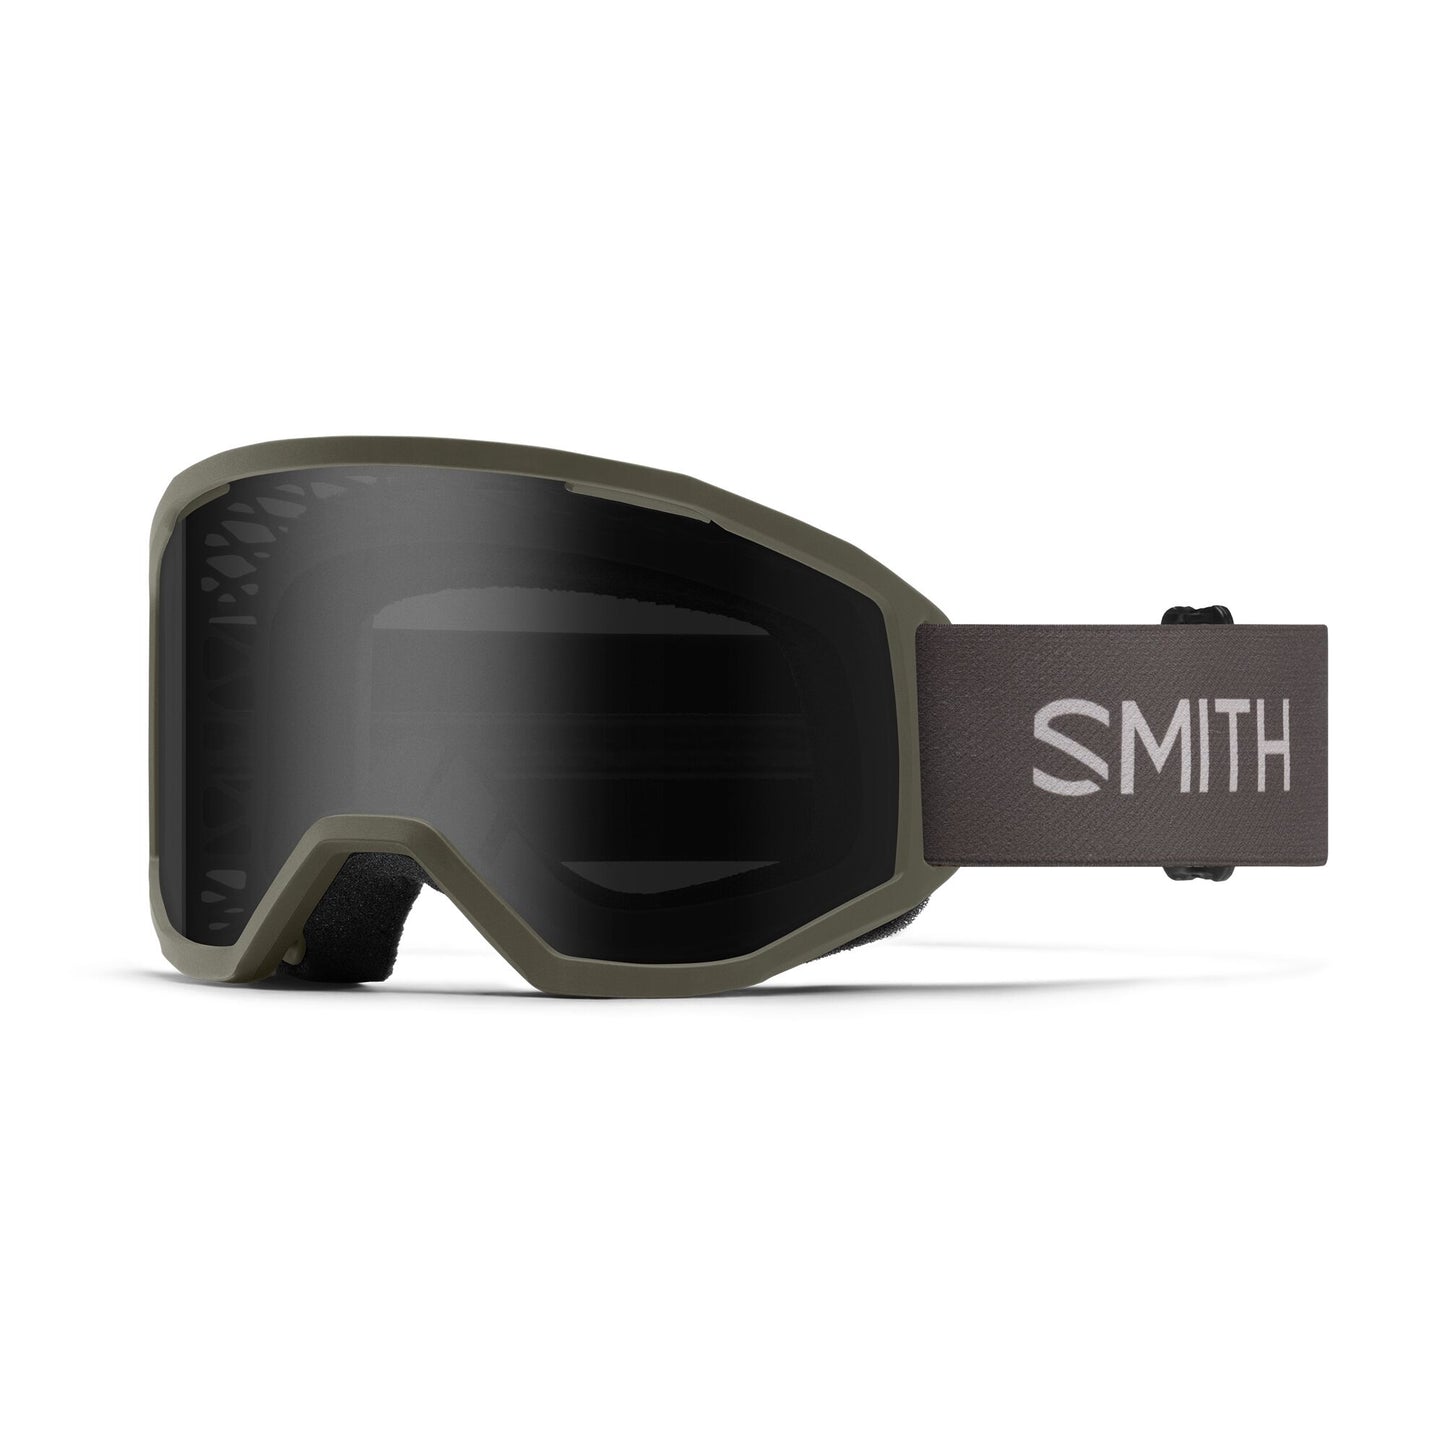 Smith Loam Goggles - One Size Fits Most - Forest - Sun Black AF Lens